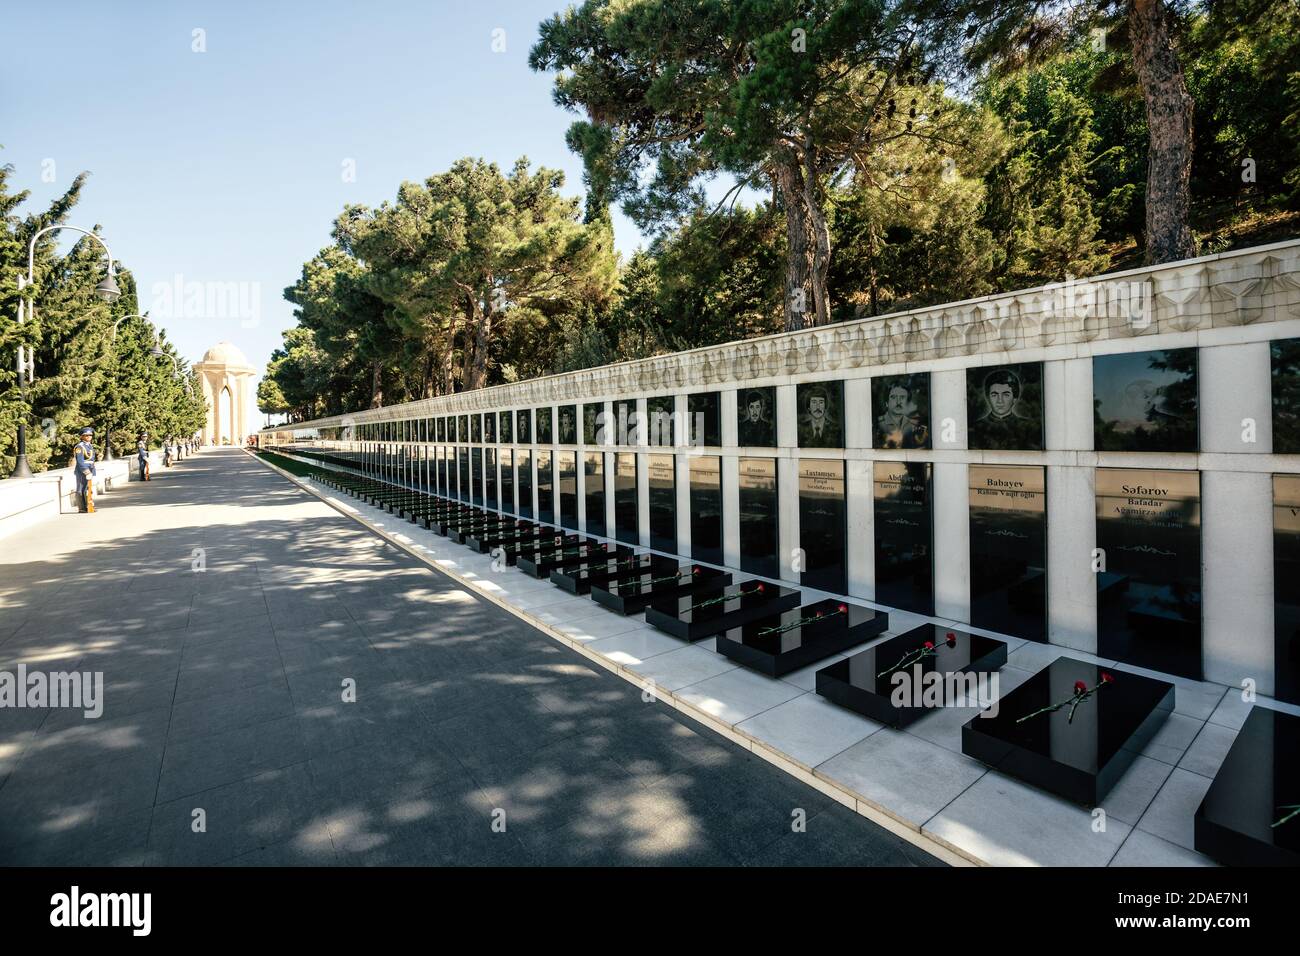 BAKU, AZERBAIJAN - Jul 14, 2016: Tomb of Heros. A memorial of those killed by the Soviet army during the independence war of Azerbaijan Stock Photo